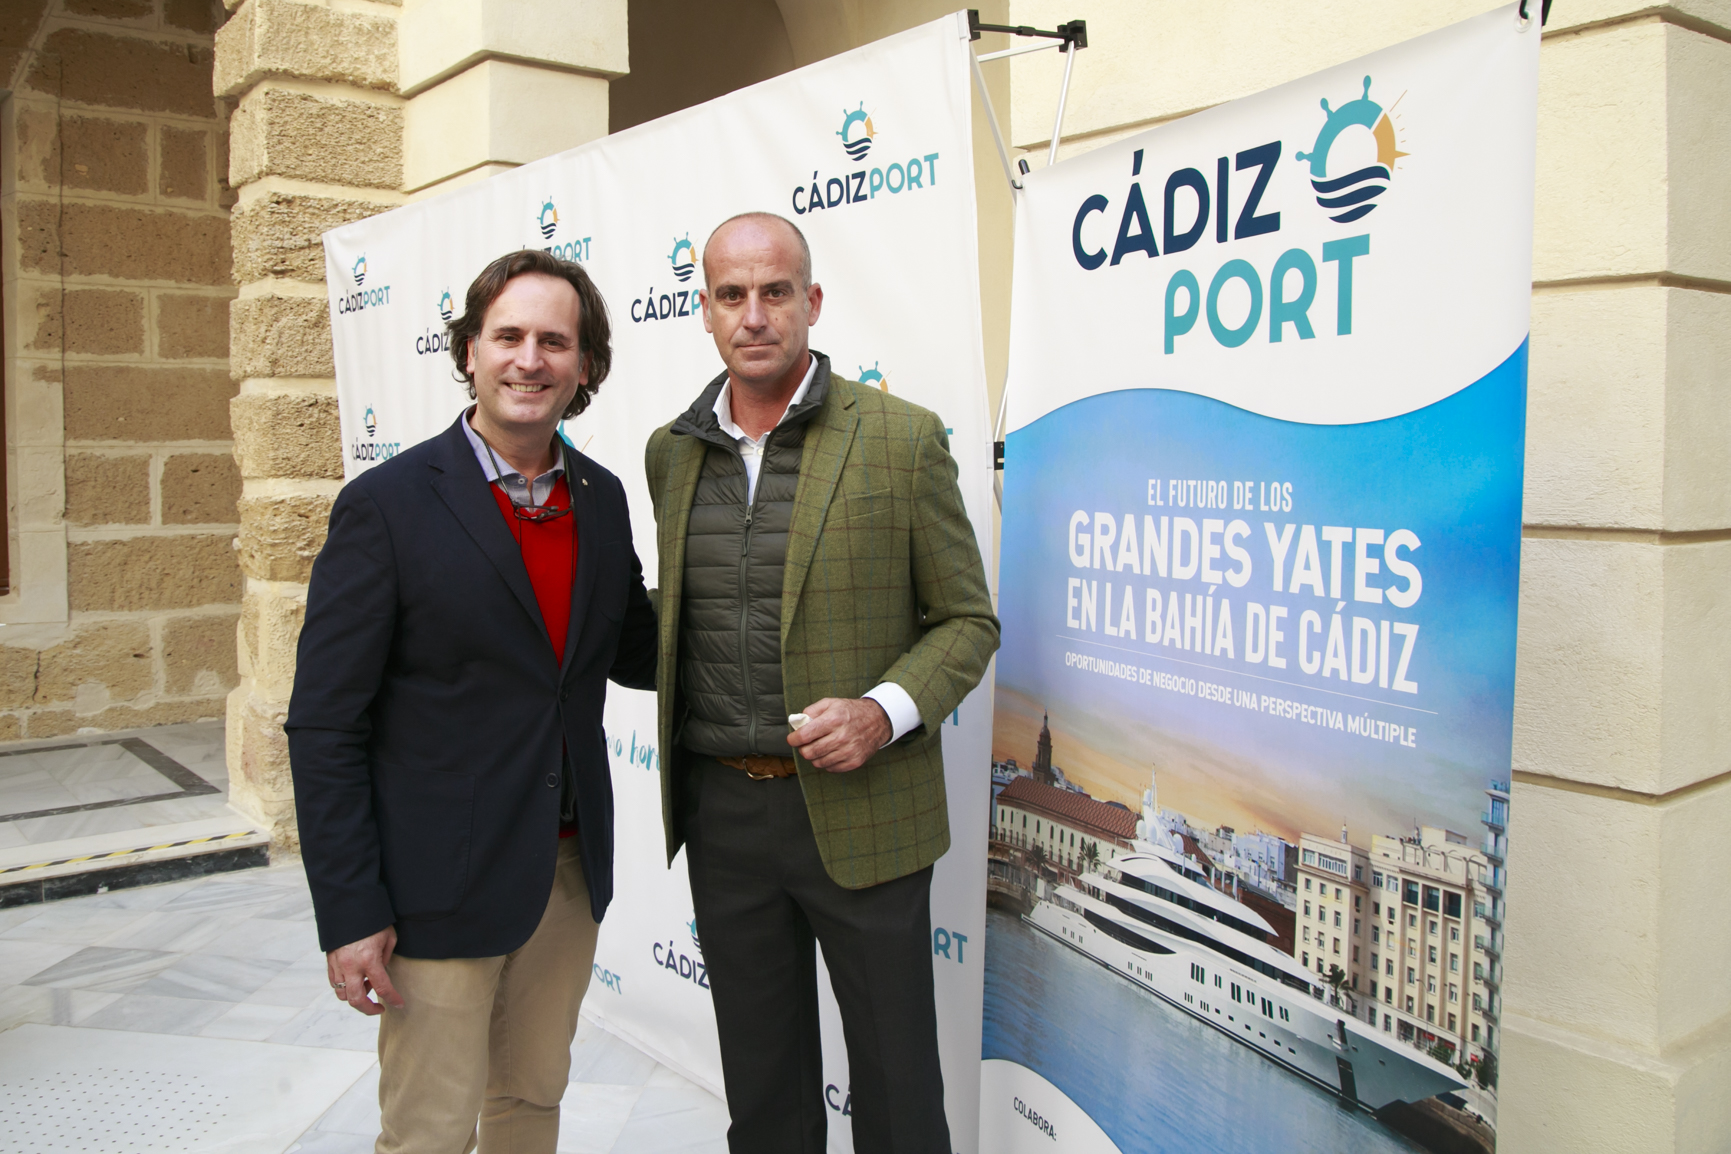 Lamaignere Shipping attends the conference ‘The future of large yachts in the Bay of Cádiz: Business opportunities from multiple perspectives’.